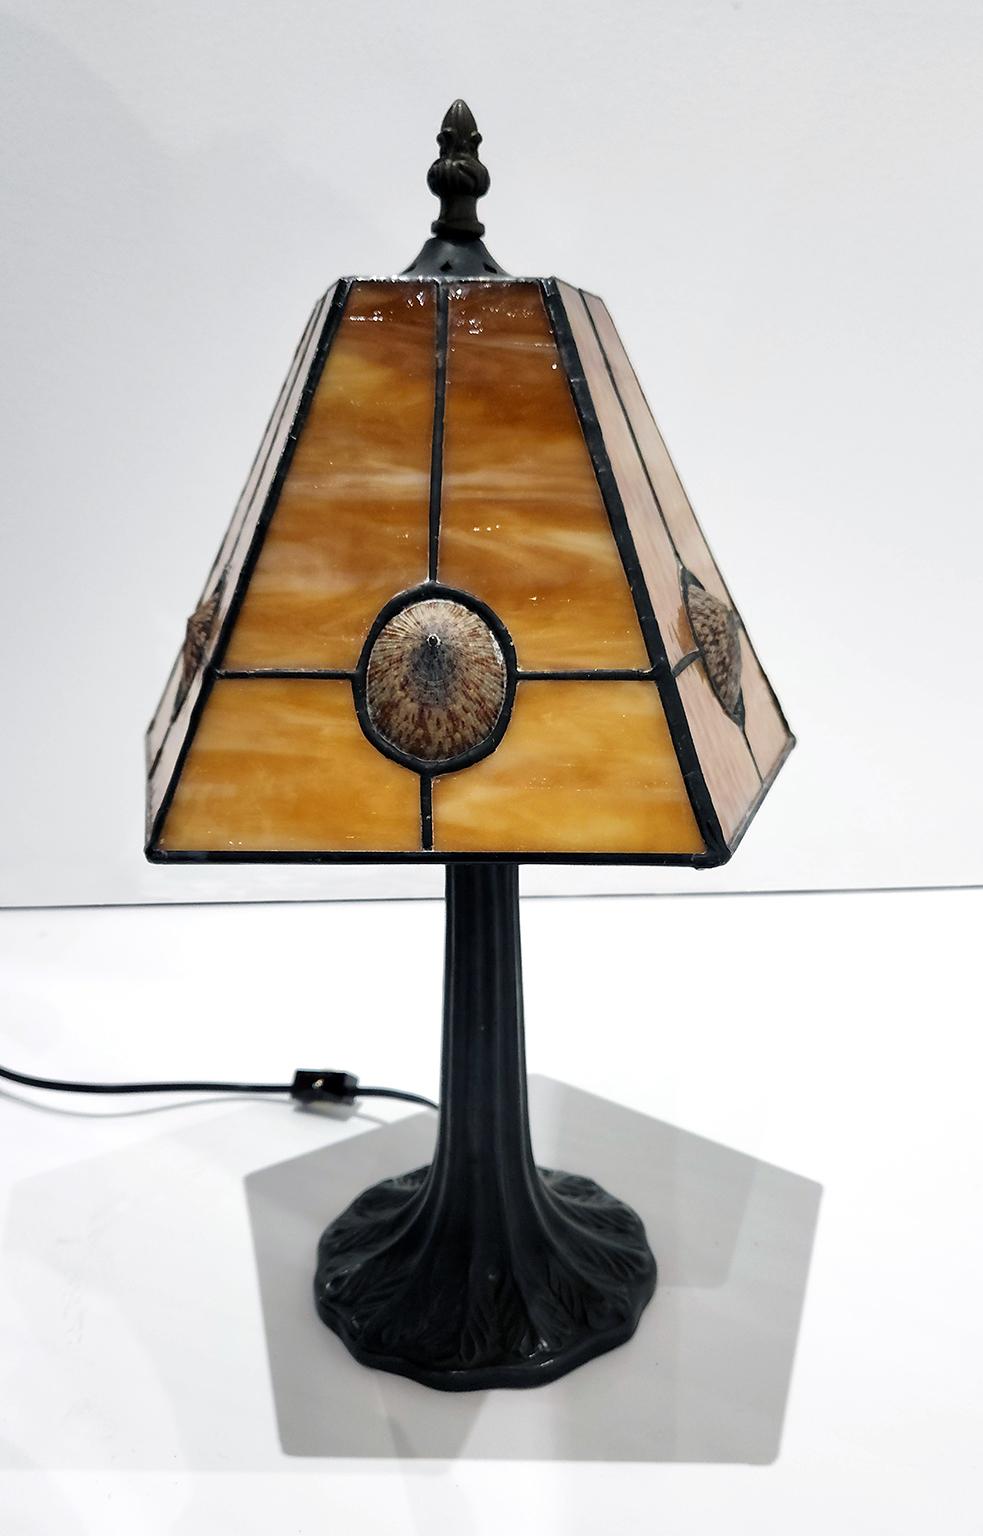 17-inch high, five-sided limpet shell, stained glass and bronze table lamp from Richard Hoosin Studio with incandescent bulb. Inscribed Hoosin 5P9851 and dated 98 on top of shade.  